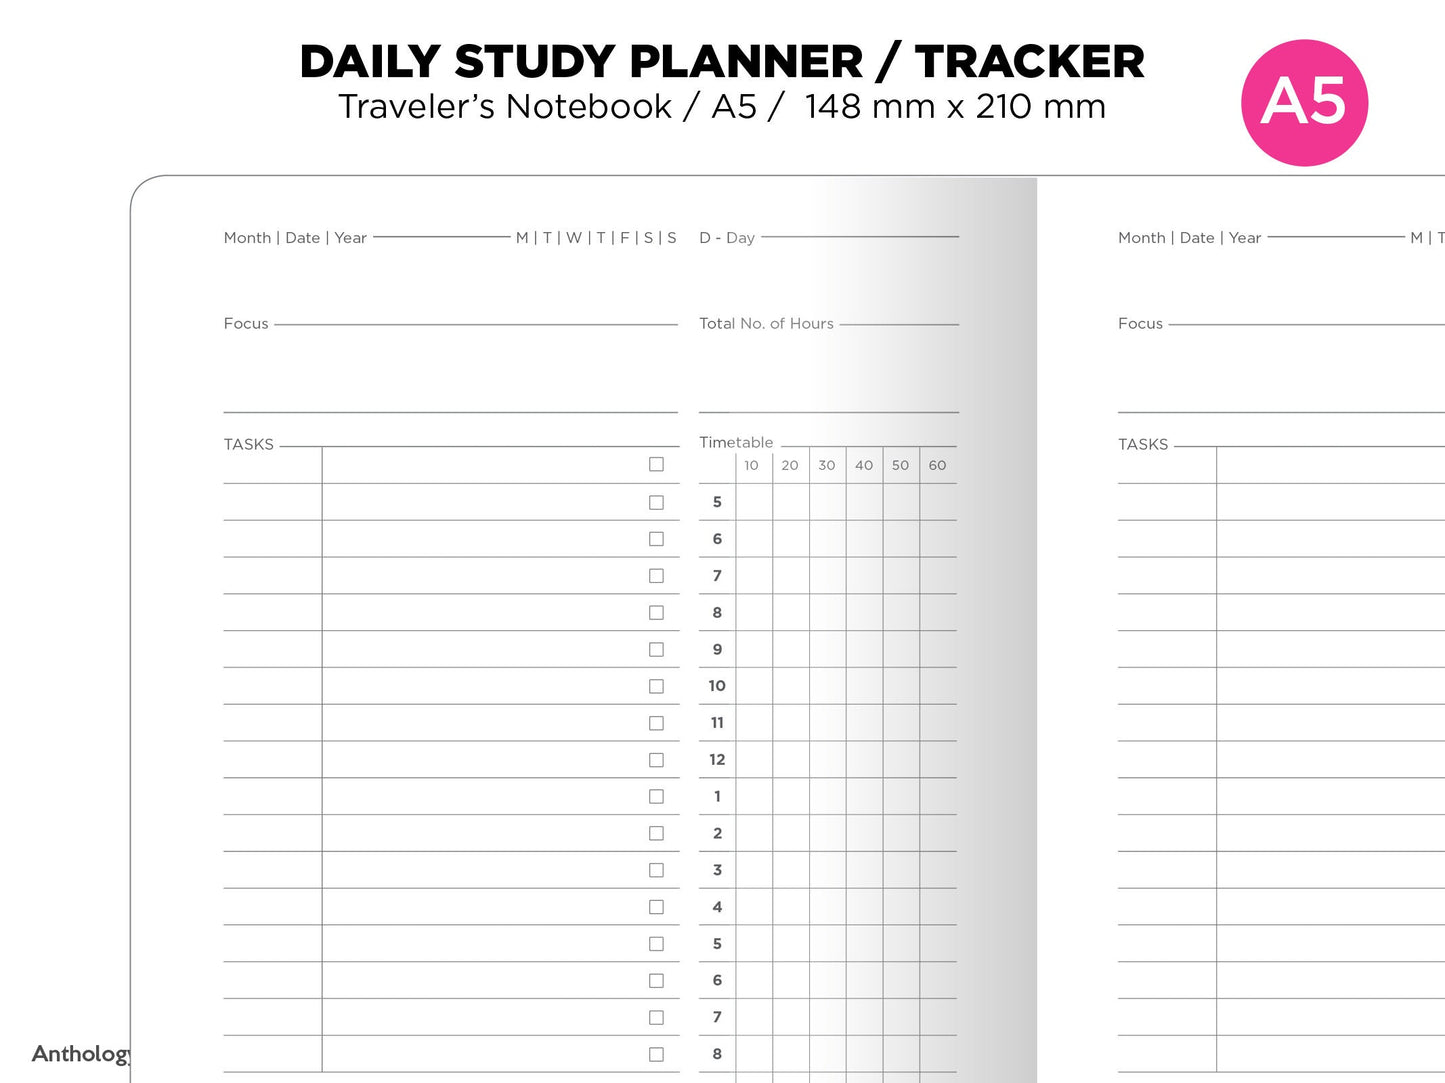 A5 TN DAILY STUDY Planner Tracker Printable Insert Traveler's Notebook A5024